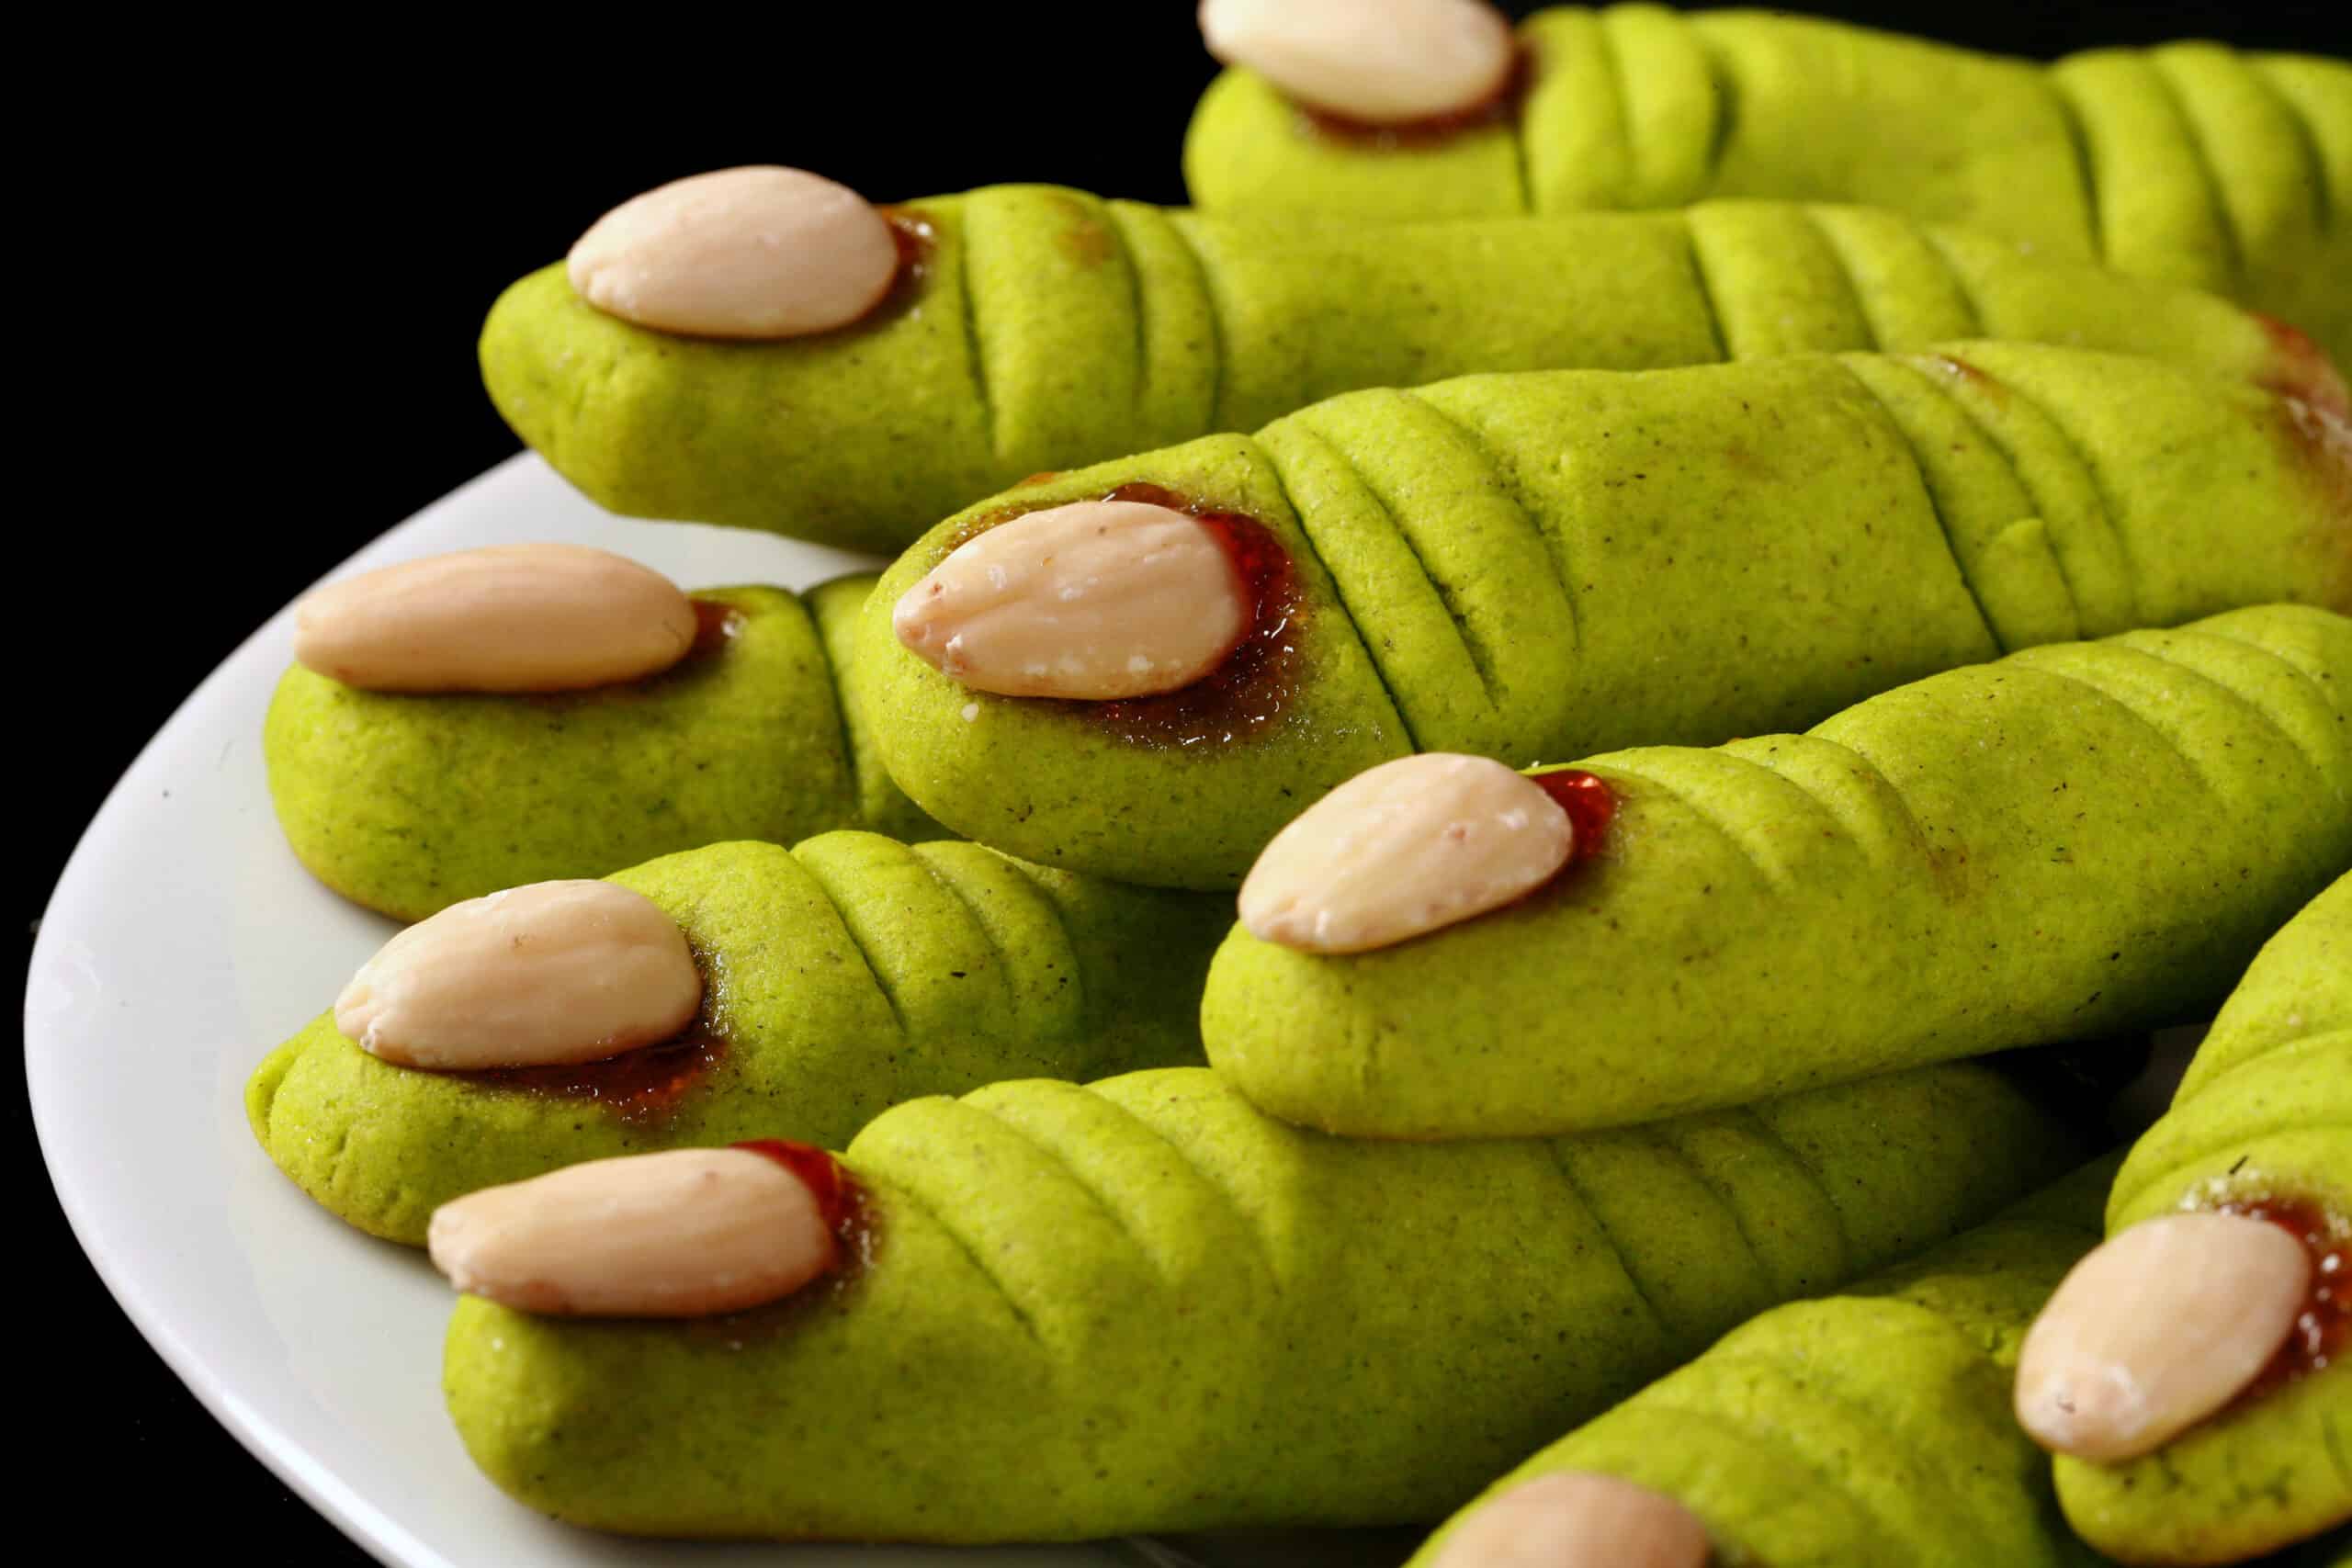 A plate of bright green gluten-free witches’ finger cookies.